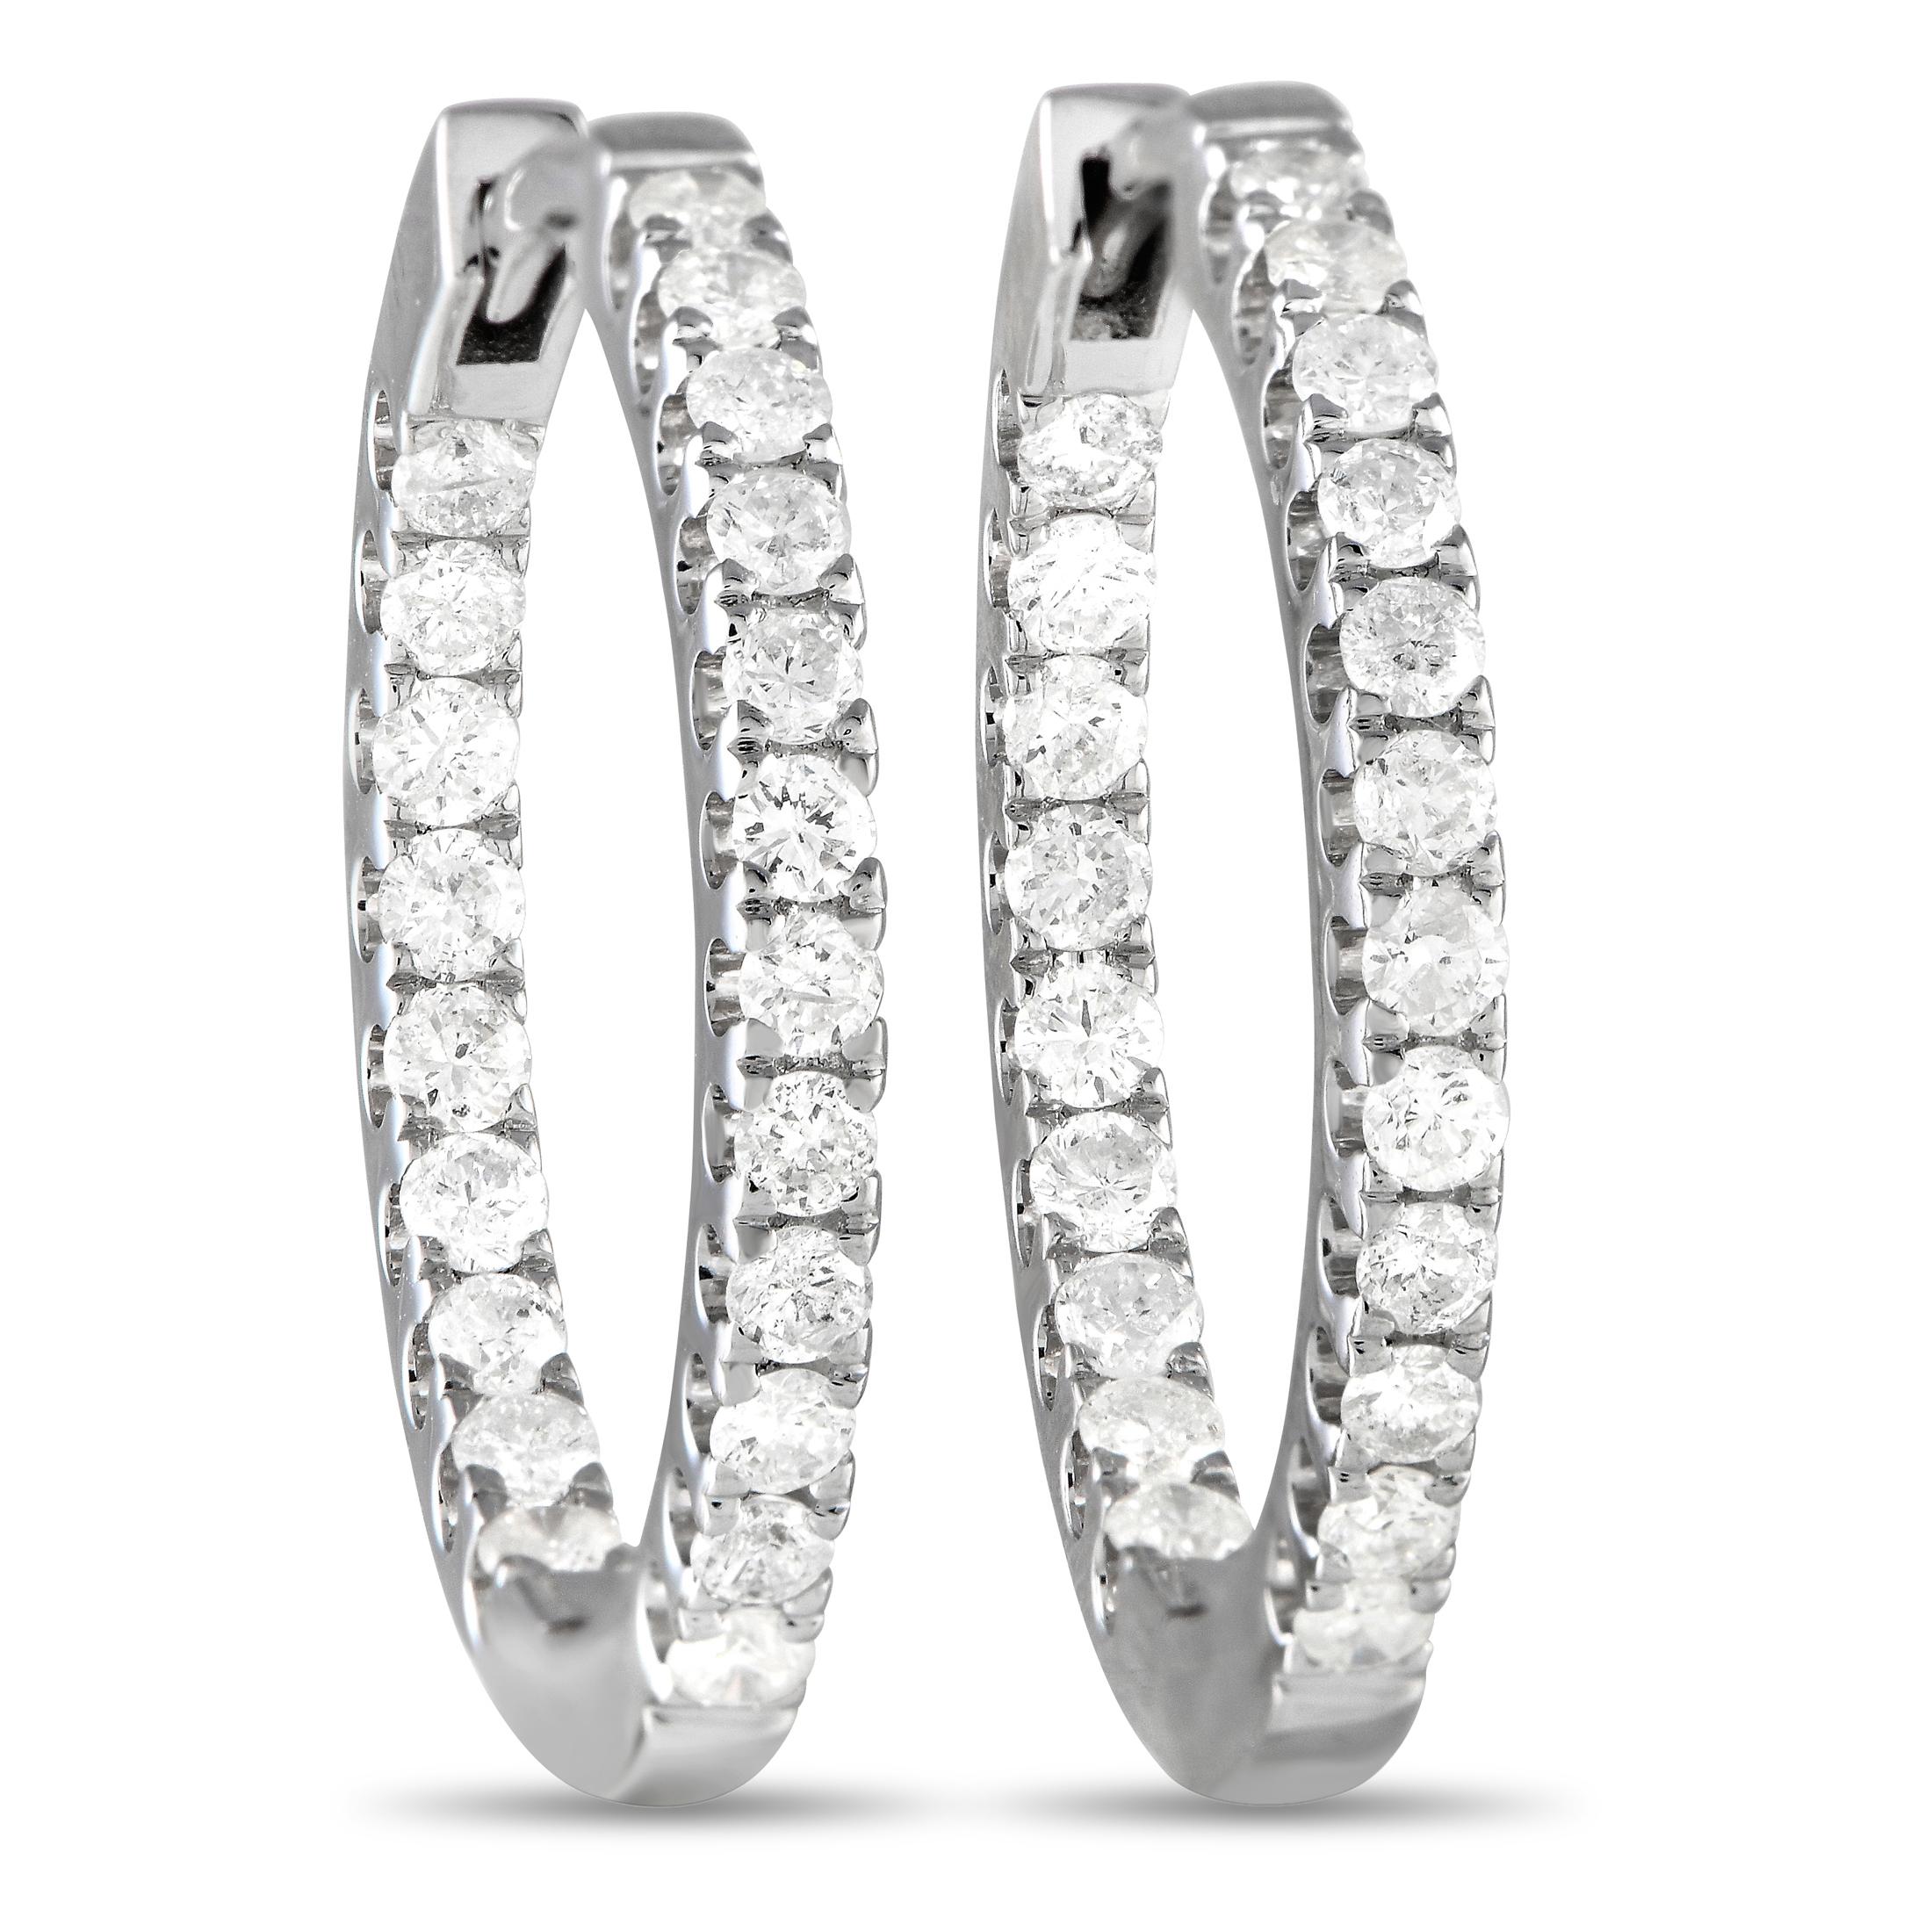 LB Exclusive 14K White Gold 1.0ct Diamond Inside-Out Hoop Earrings In New Condition For Sale In Southampton, PA